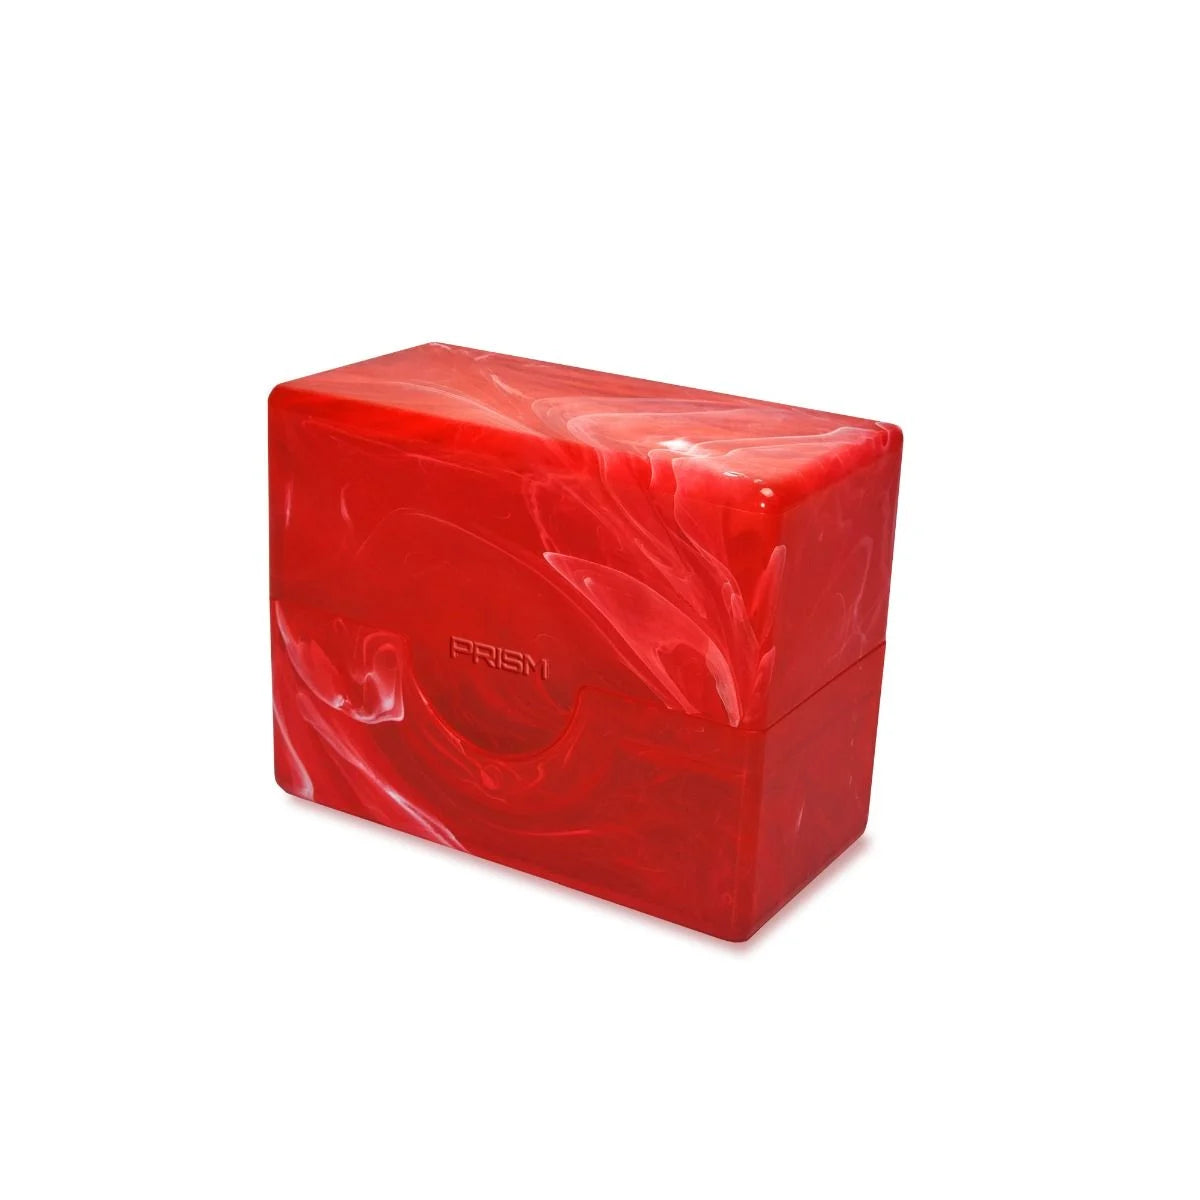 Prism Deck Case - 50 CT - Carnelian Red | CCGPrime